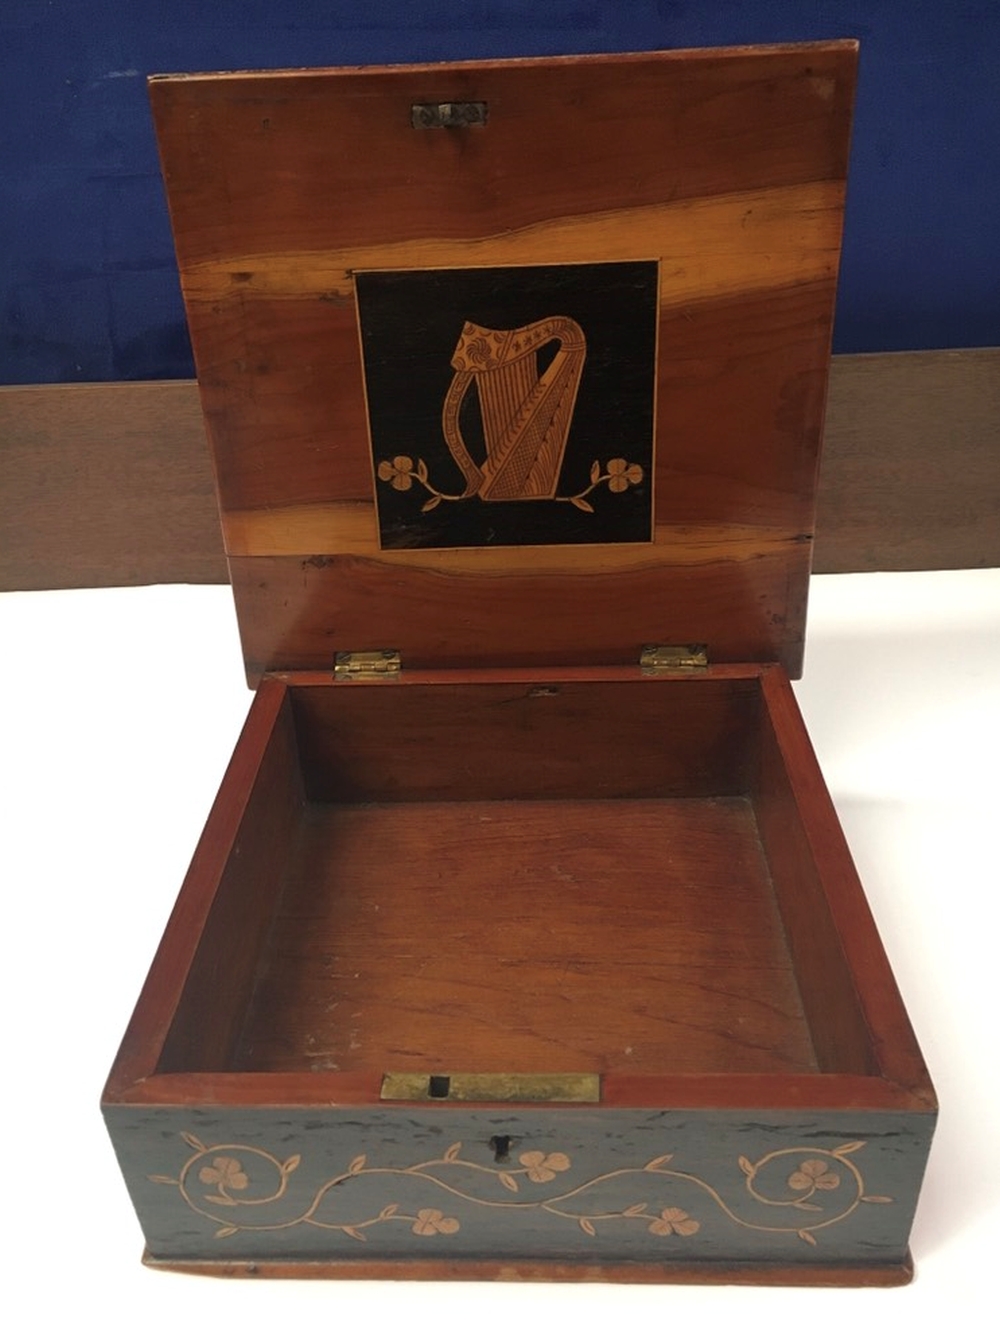 A SQUARE KILLARNEY BOX, 19th century, arbutus wood and yew-wood, the top with shamrock and leafy - Image 2 of 3